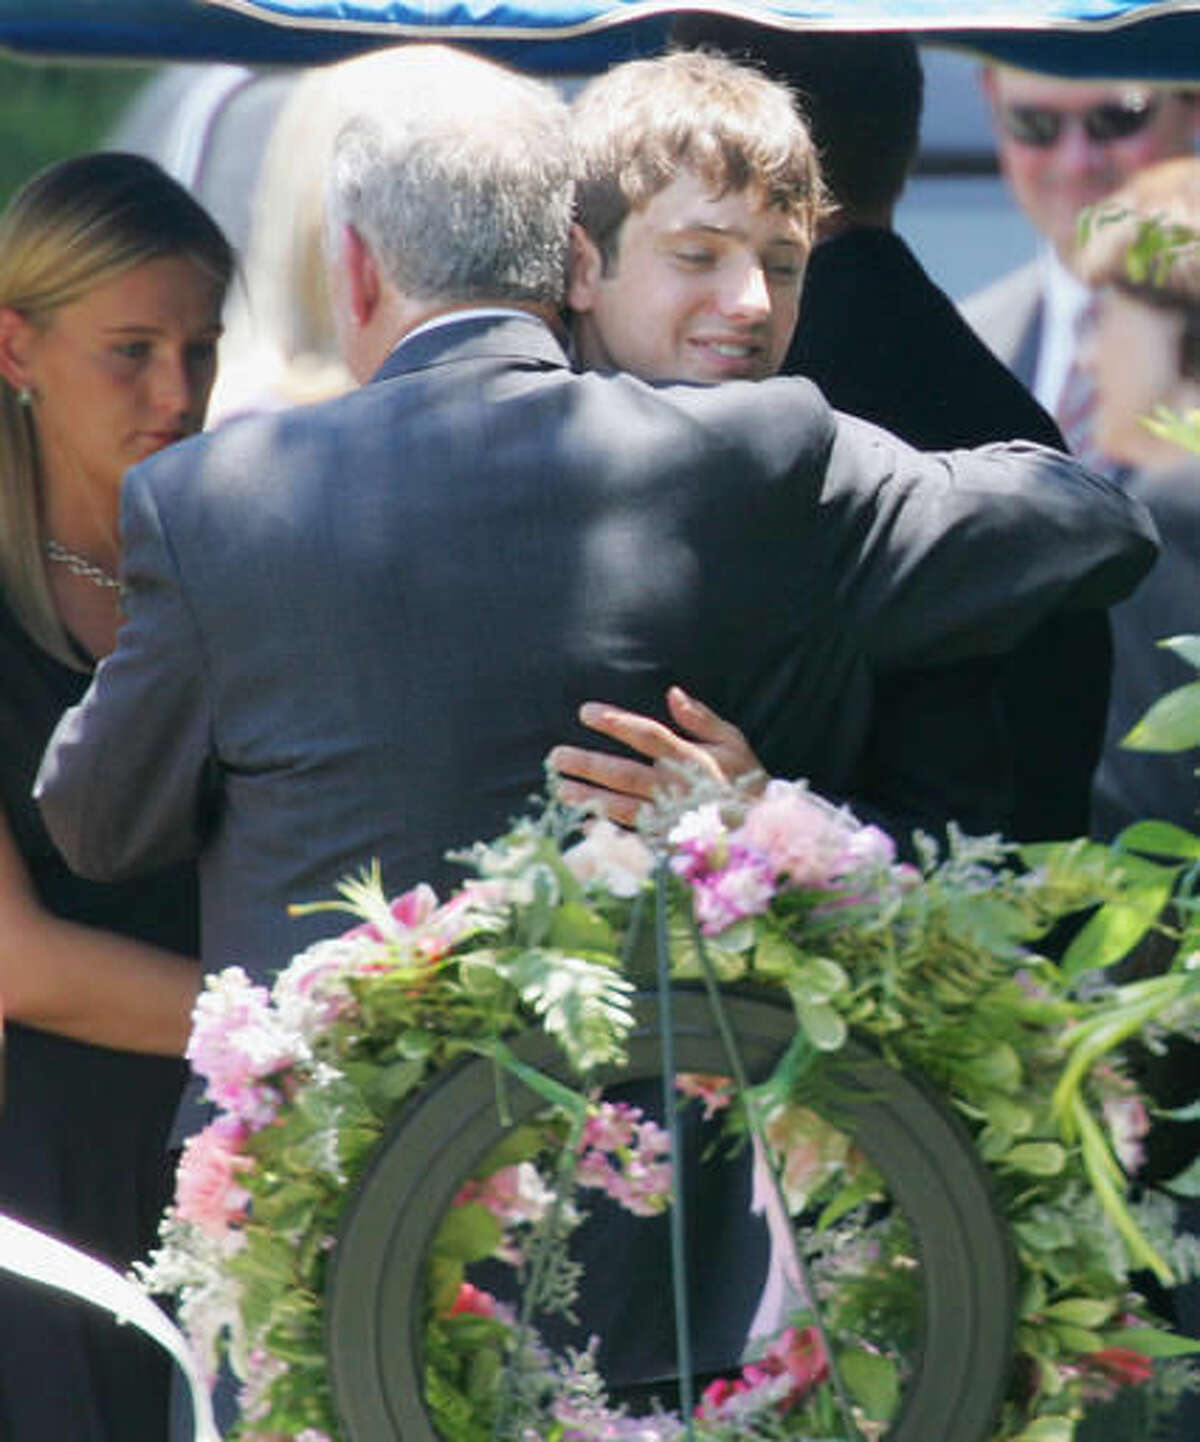 FILE - In this June 29, 2006, file photo, John Ramsey hugs his son, Burke, facing camera, at the graves of his wife, Patsy, and daughter JonBenet, during services for his wife at the St. James Episcopal Cemetery in Marietta, Ga. Burke Ramsey discussed his sister's death with TV's "Dr. Phil" in an interview broadcast on Monday, Sept. 12, 2016. (AP Photo/Ric Feld, File)